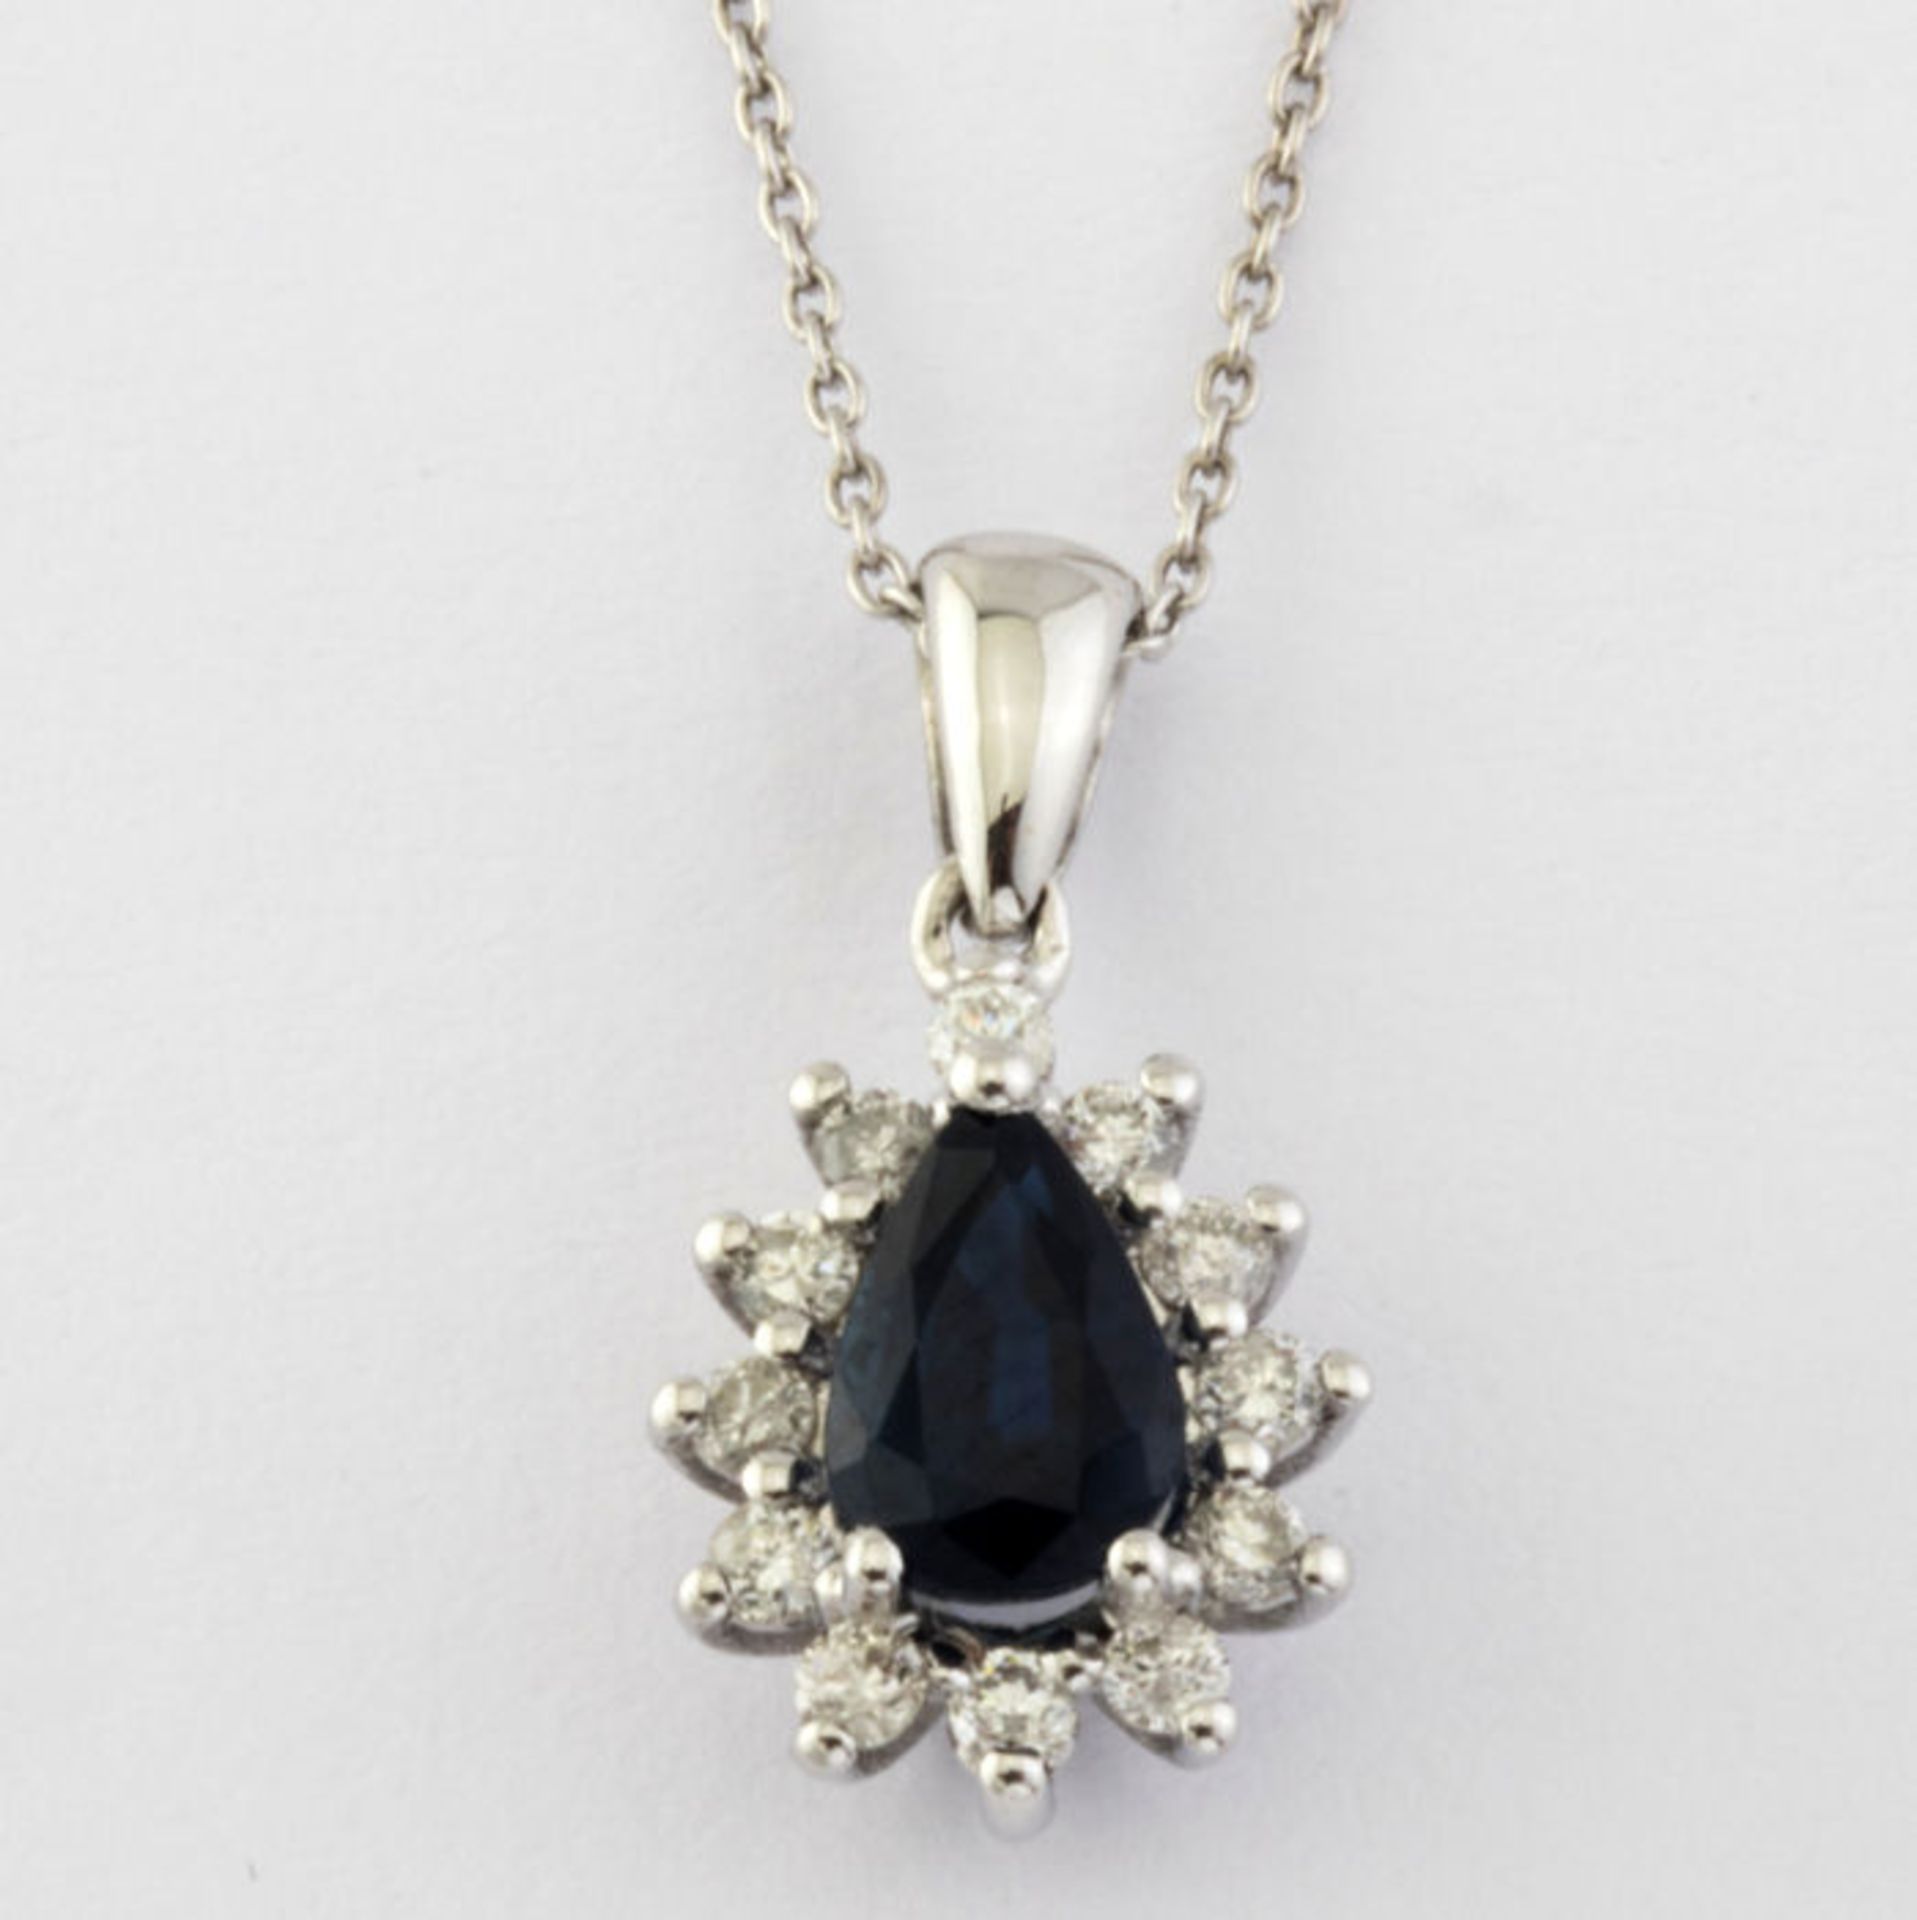 14K White Gold Cluster Pendant set with a natural sapphire and 12 brilliant cut diamonds - Image 4 of 6